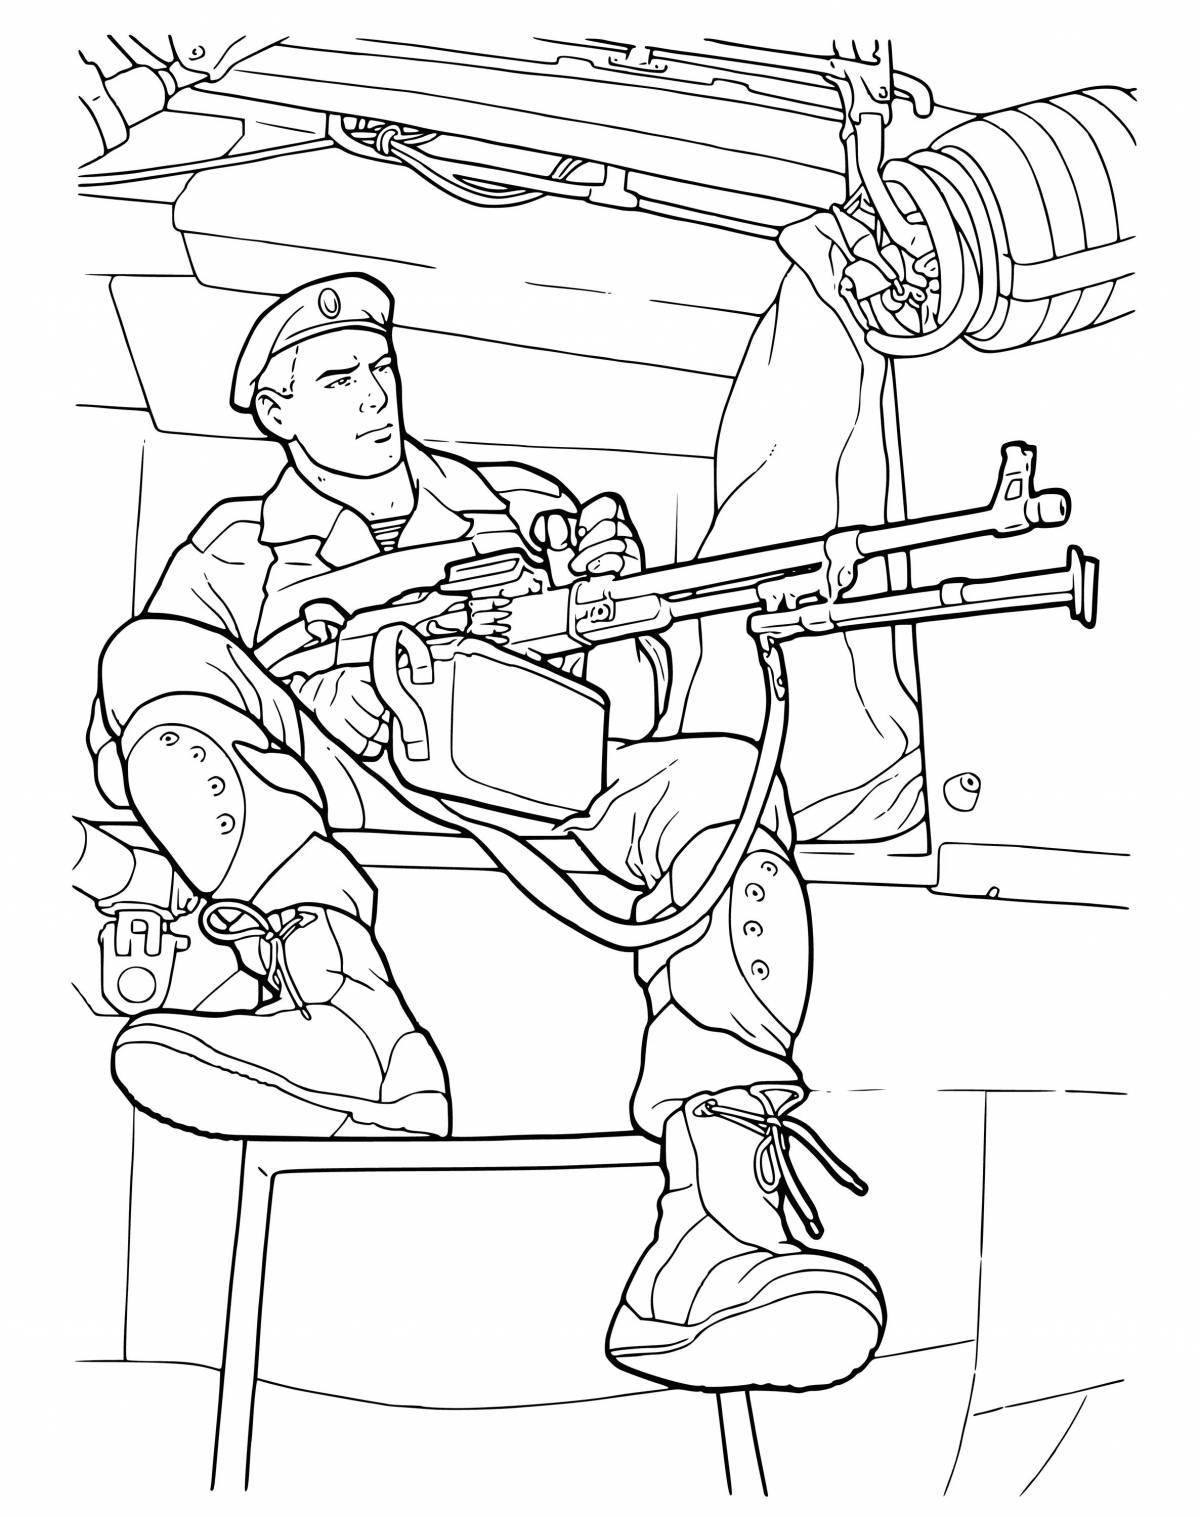 Adorable Russian soldier coloring page for kids